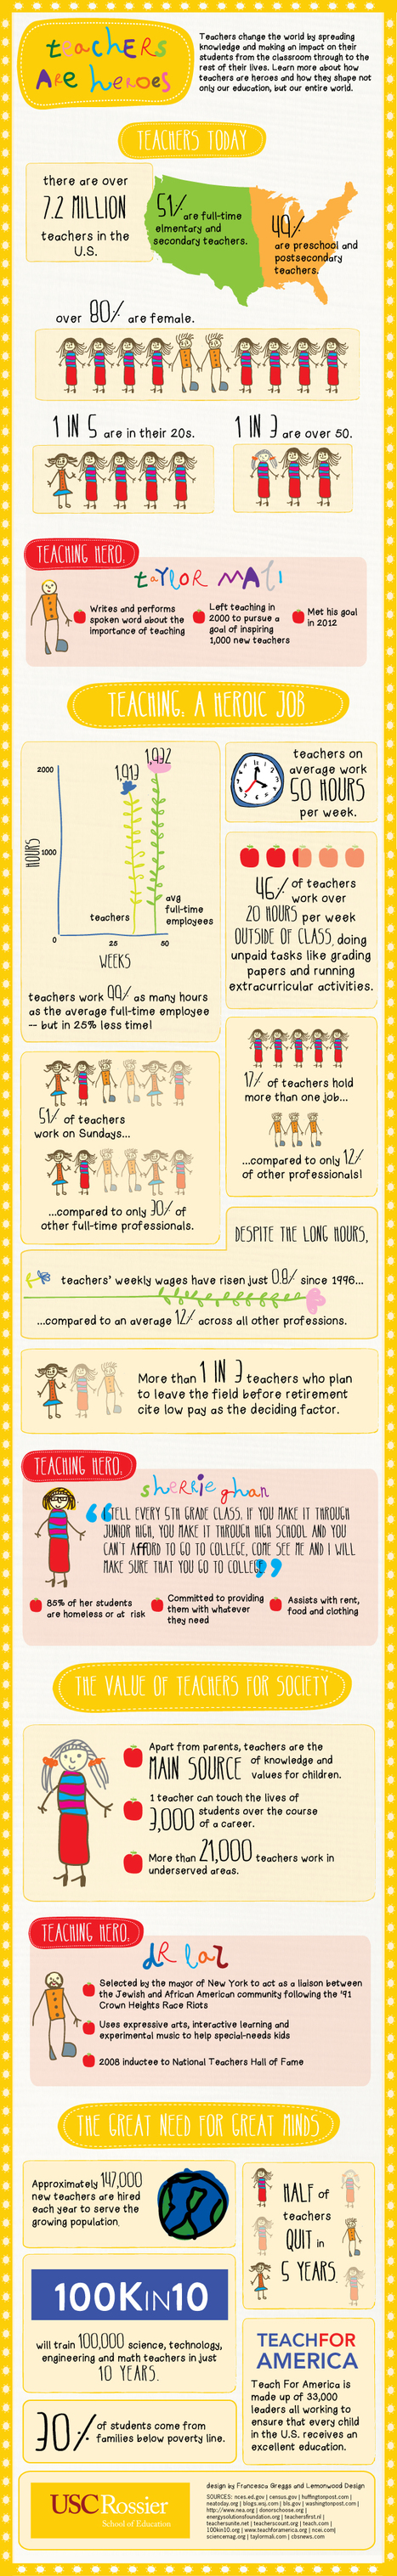 20 Things To Know About The Current State Of Teaching [Infographic] | 21st Century Learning and Teaching | Scoop.it